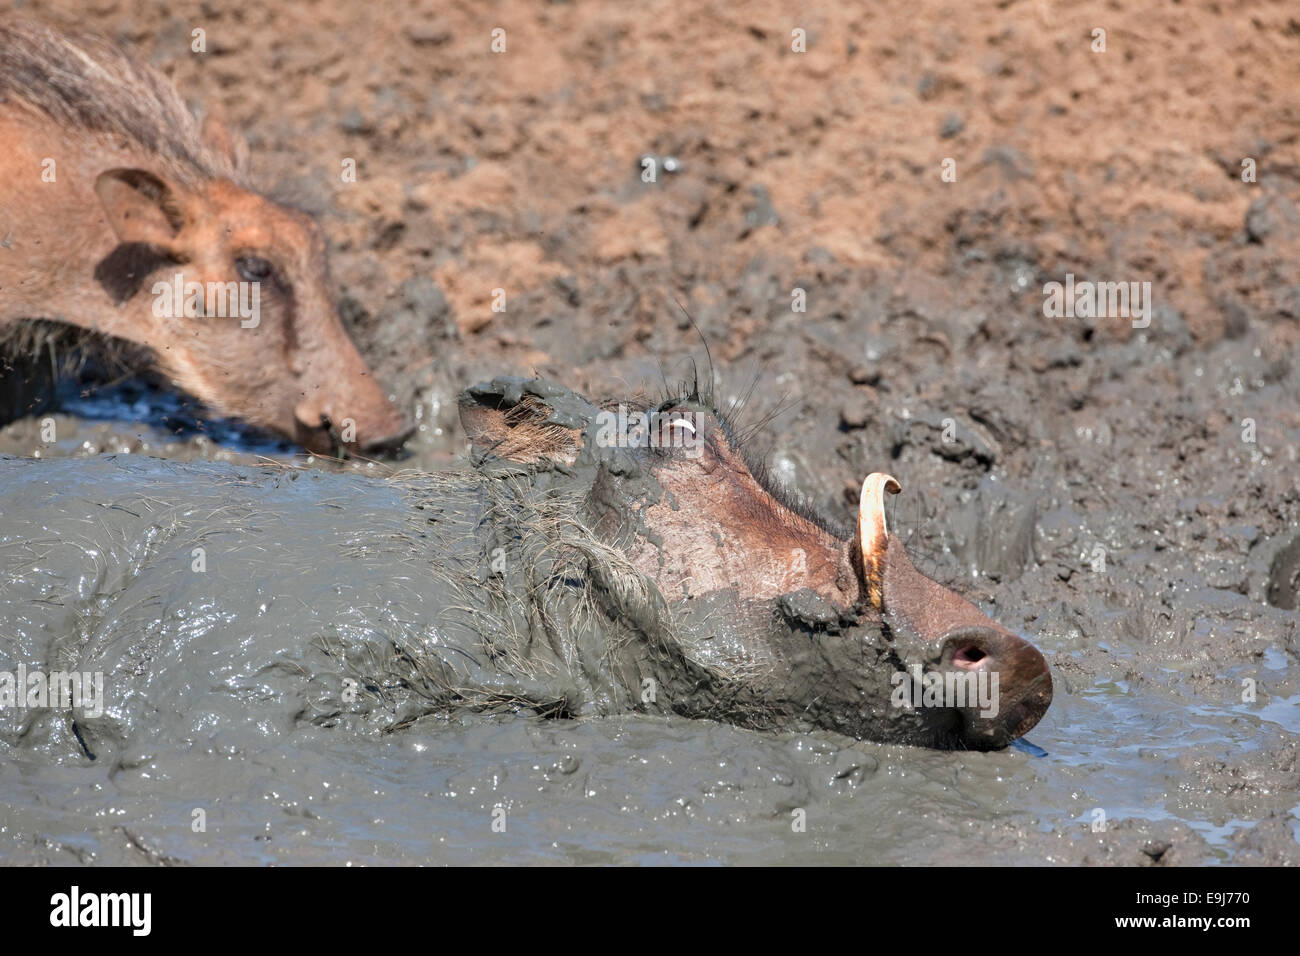 Warthog, Phacochoerus aethiopicus, wallowing, Mkhuze game reserve, South Africa Stock Photo